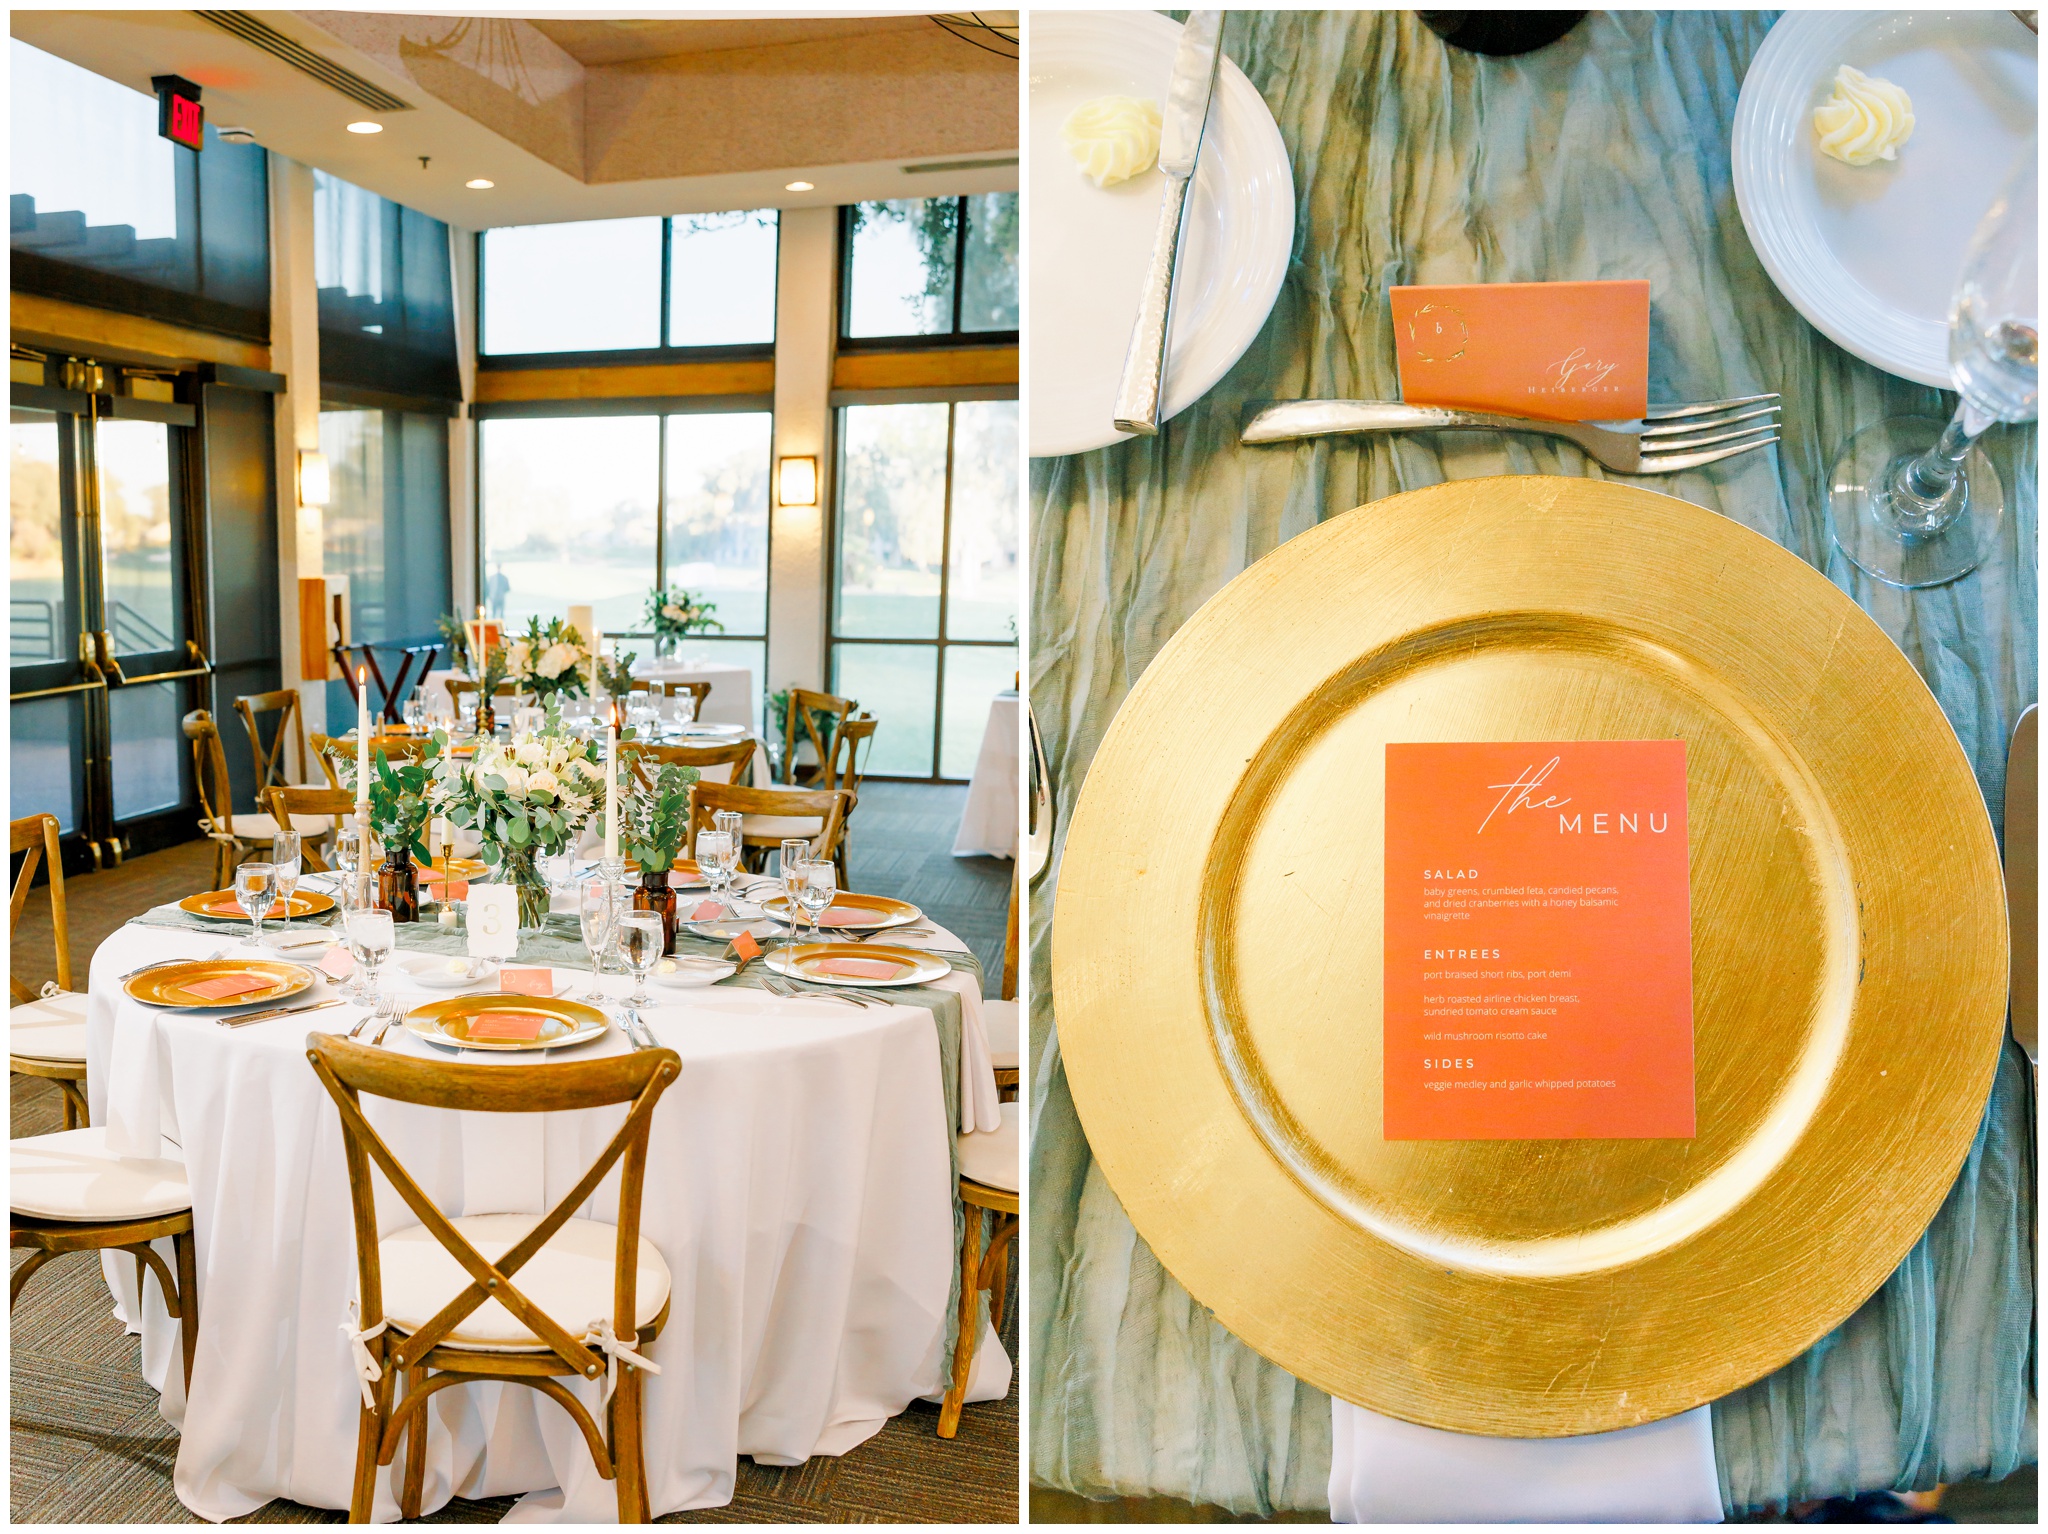 Gainey ranch reception decor, sage table runner, gold charger, terracotta place card